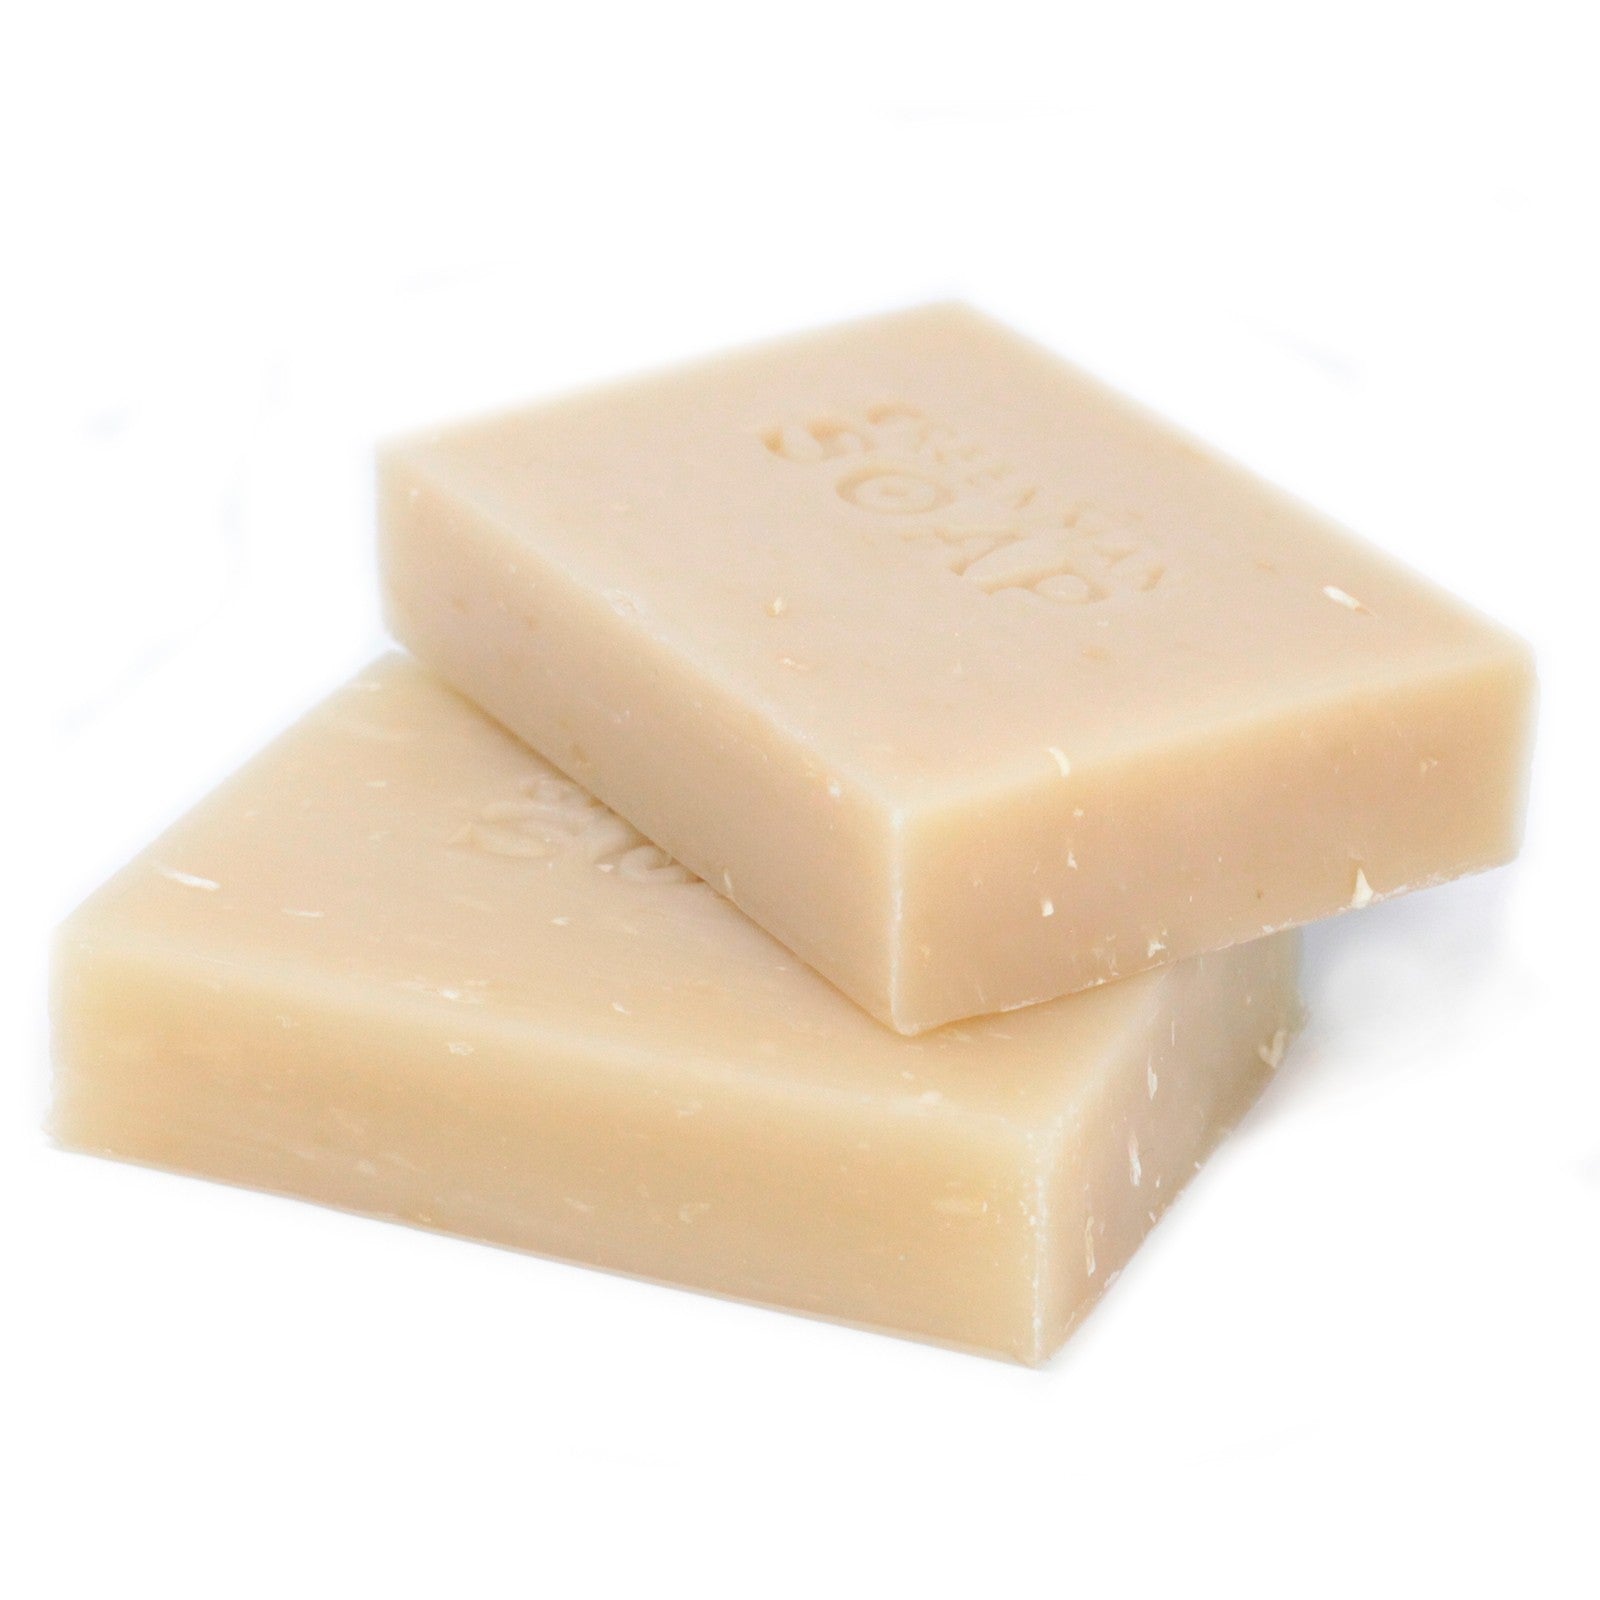 View Greenman Soap Slice 100g Coconut Cool Calm information